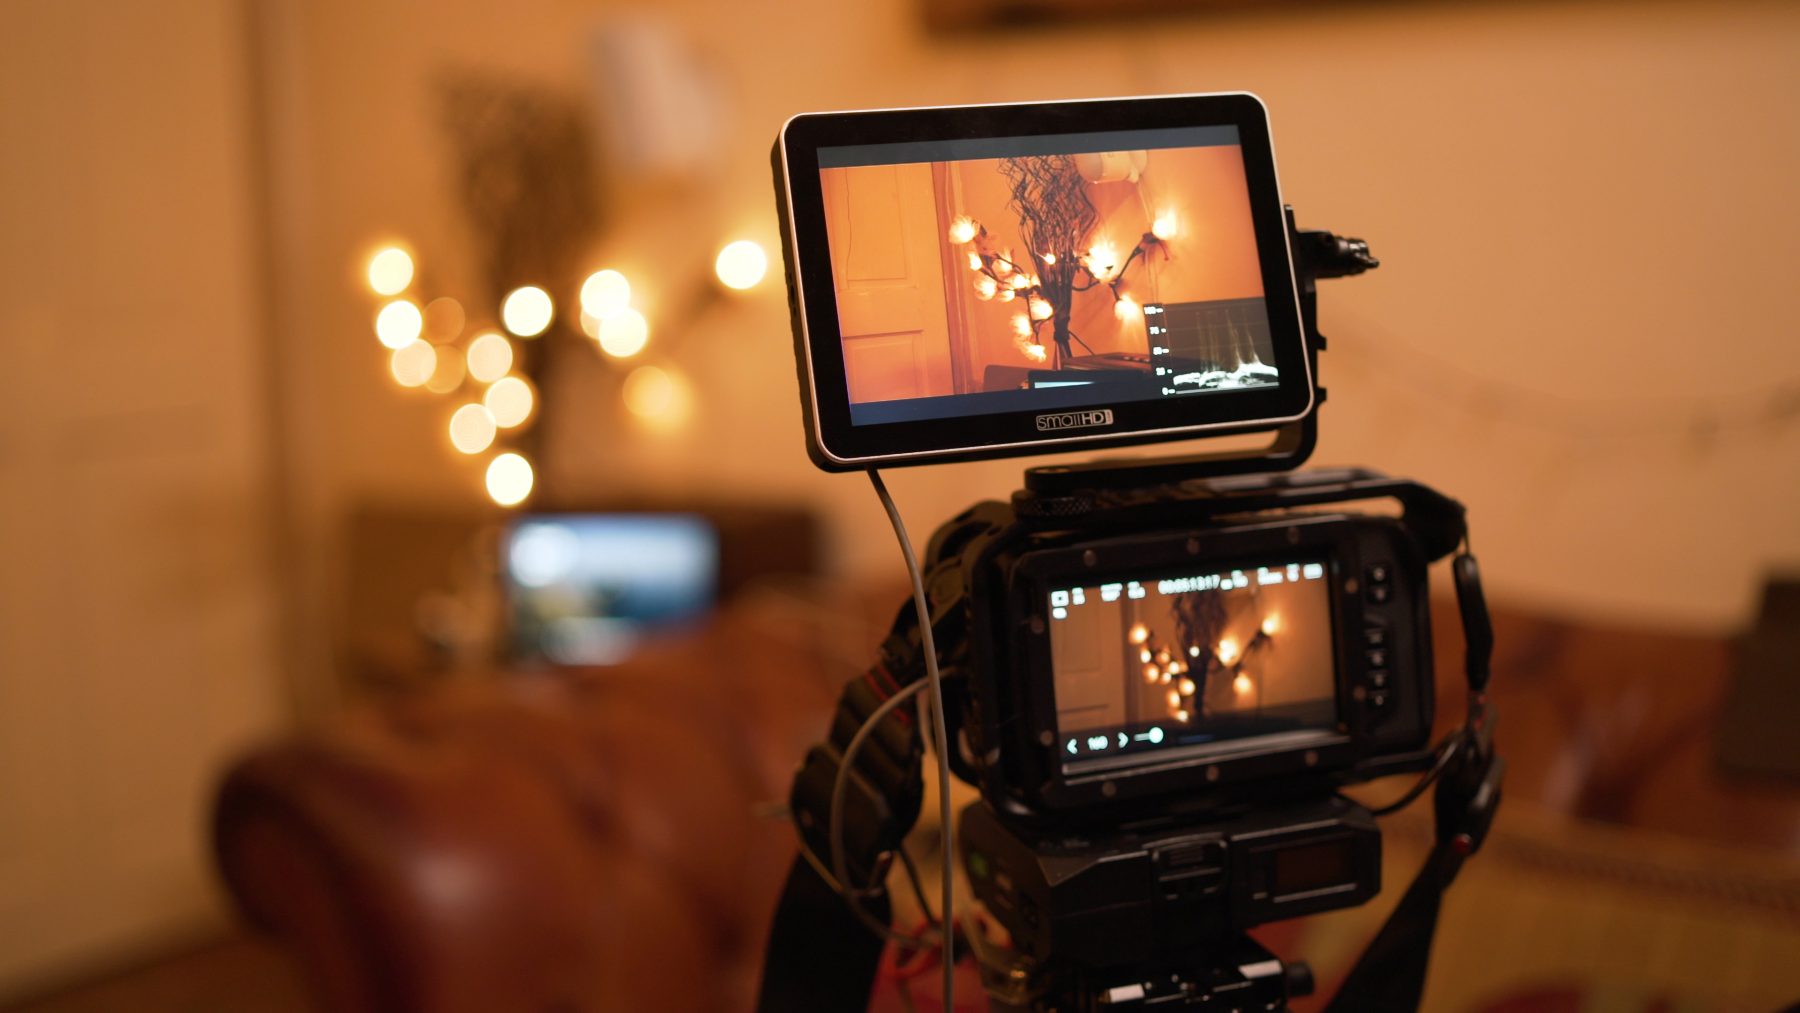 Review of the SmallHD Focus 7 monitor | Philip Bloom- Blog